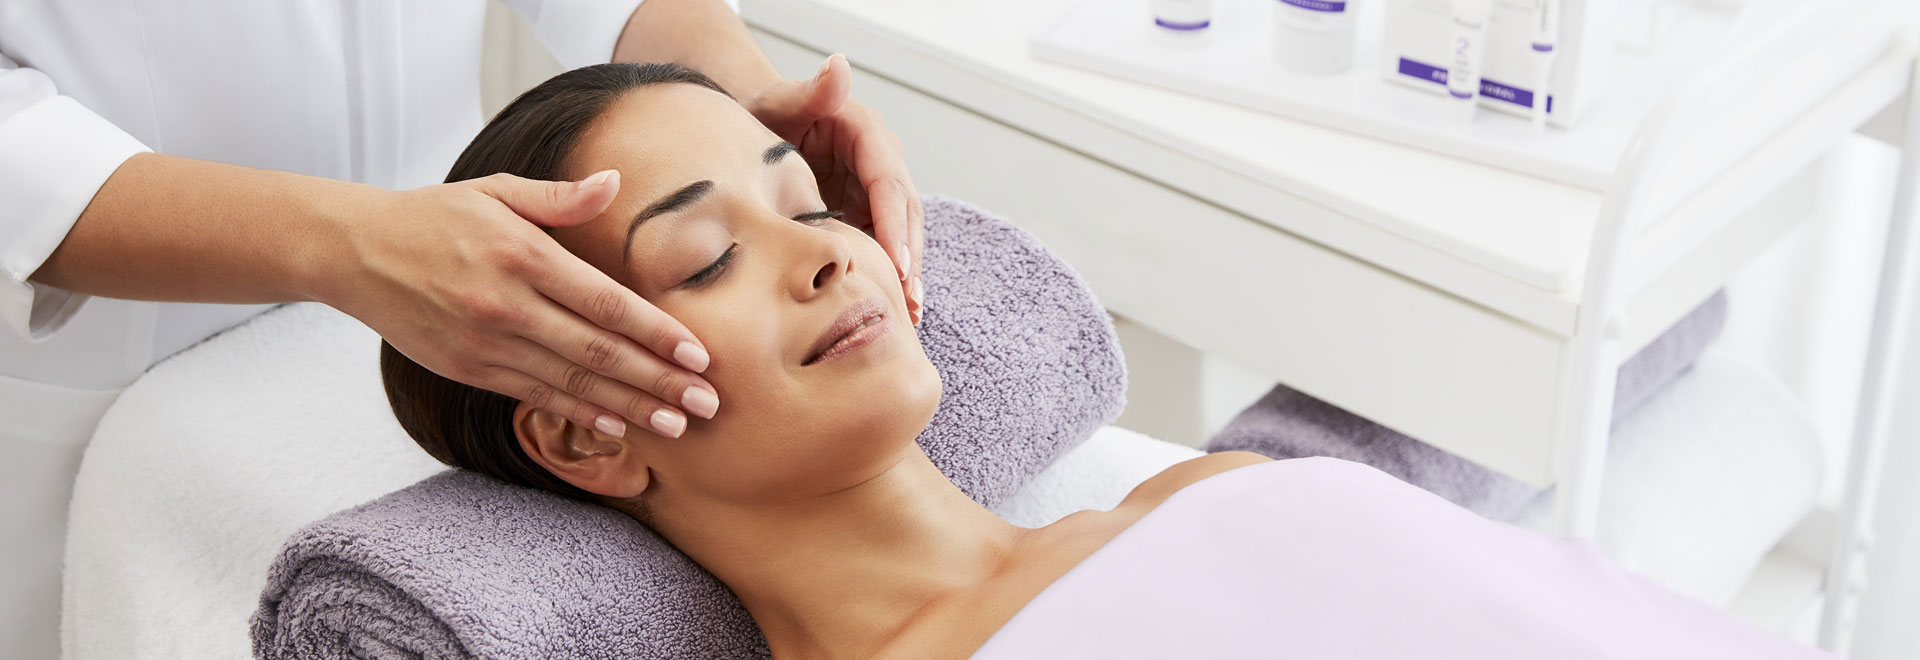 Rita specialises in advanced skincare treatments including Murad facials, microneedling, Platelet Rich Plasma facials & accupunture which will help hydrate, revitalize and smooth your skin.